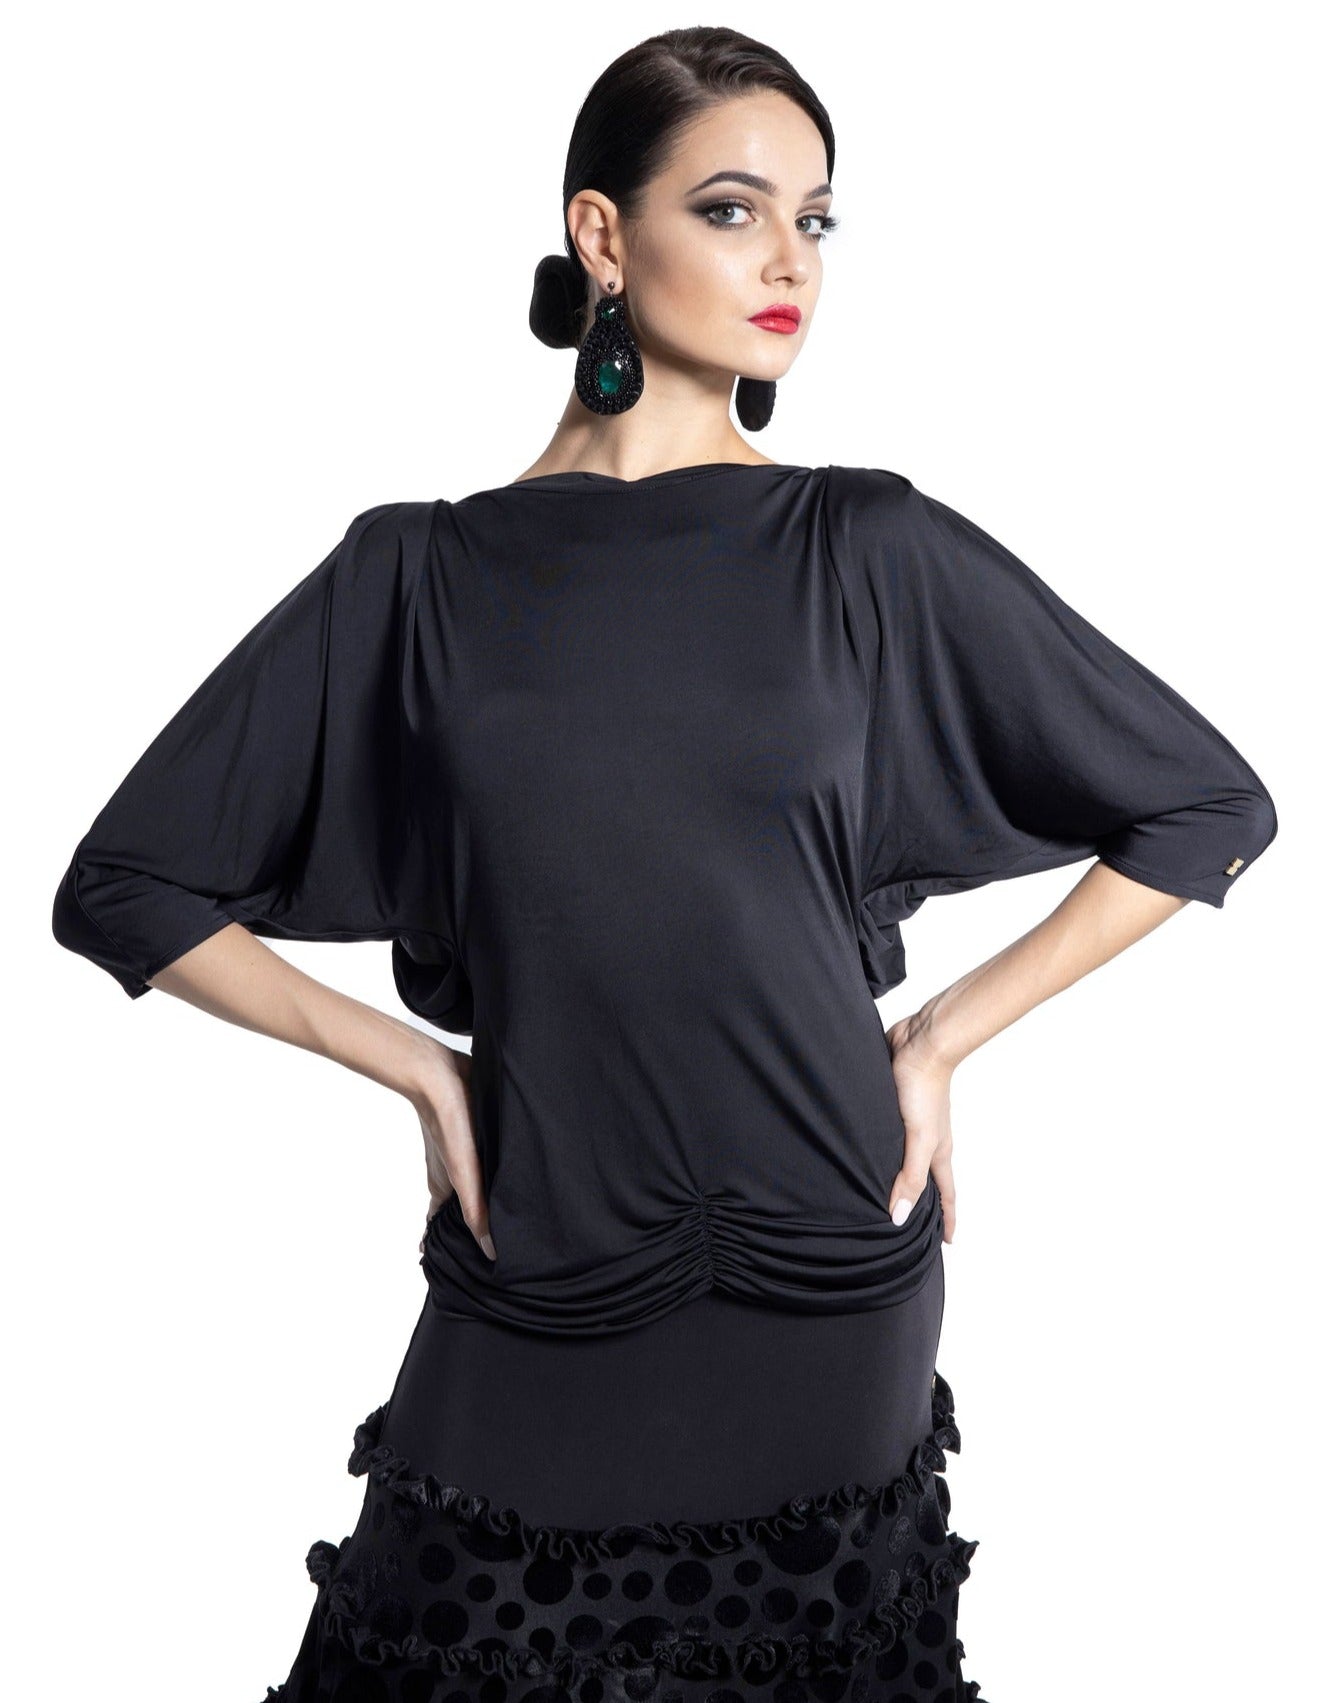 Loose Fitting Black Practice Top with Dolman Sleeves, Rouched Bottom, and Open Back